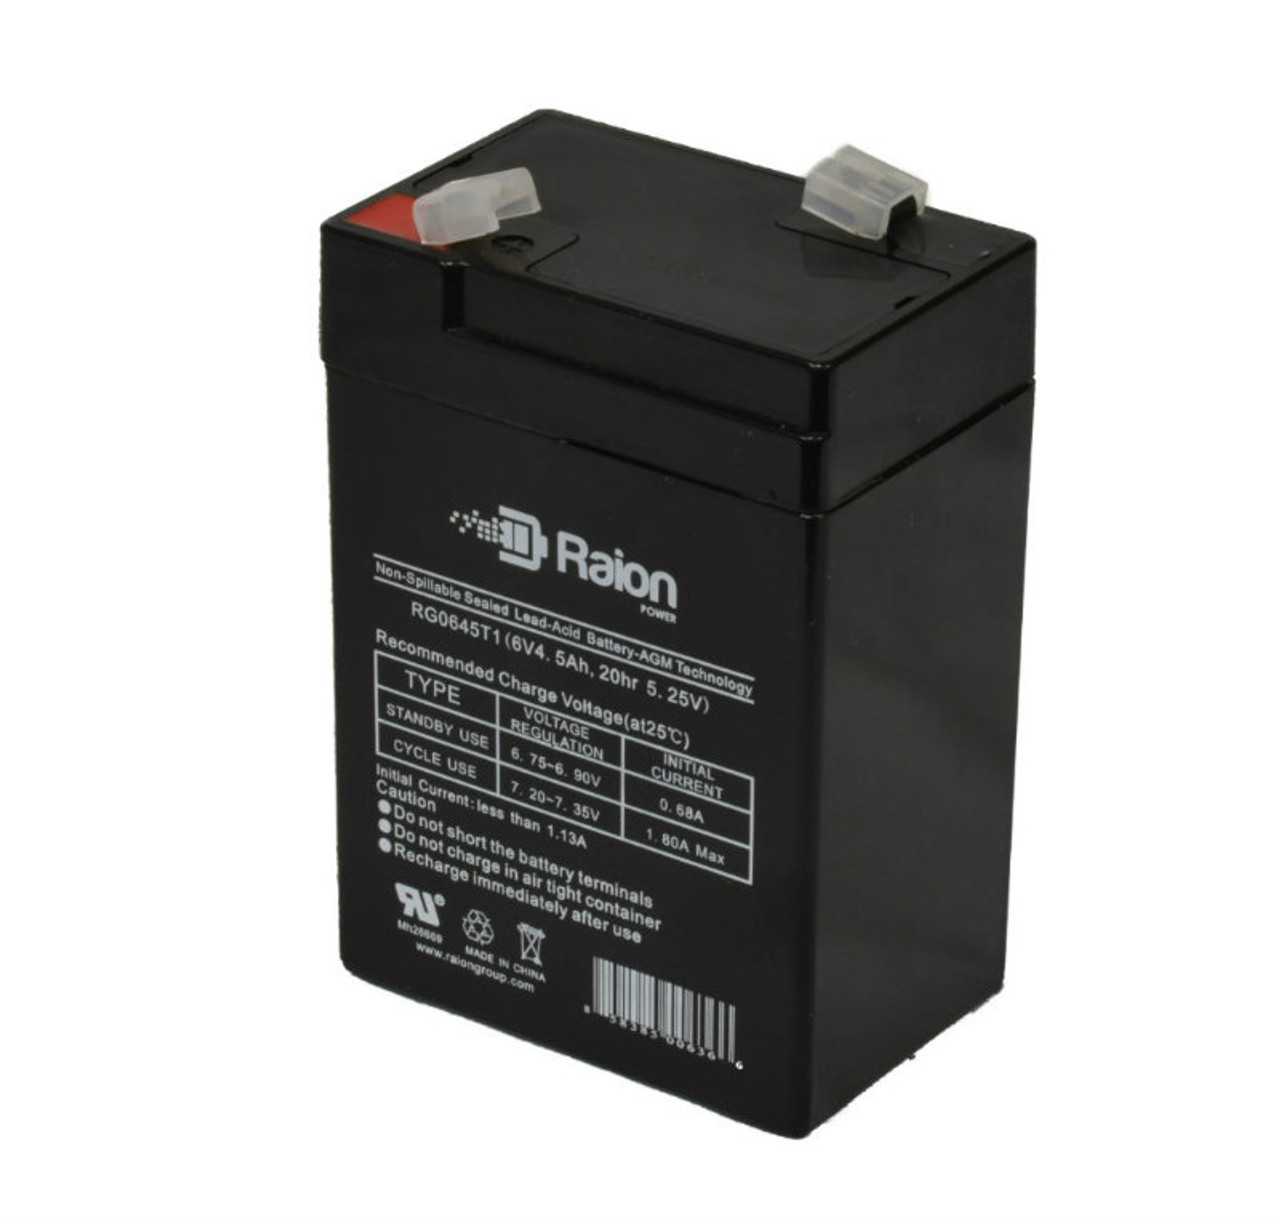 Raion Power RG0645T1 6V 4.5Ah Replacement Battery Cartridge for Dual-Lite 0120800 Battery